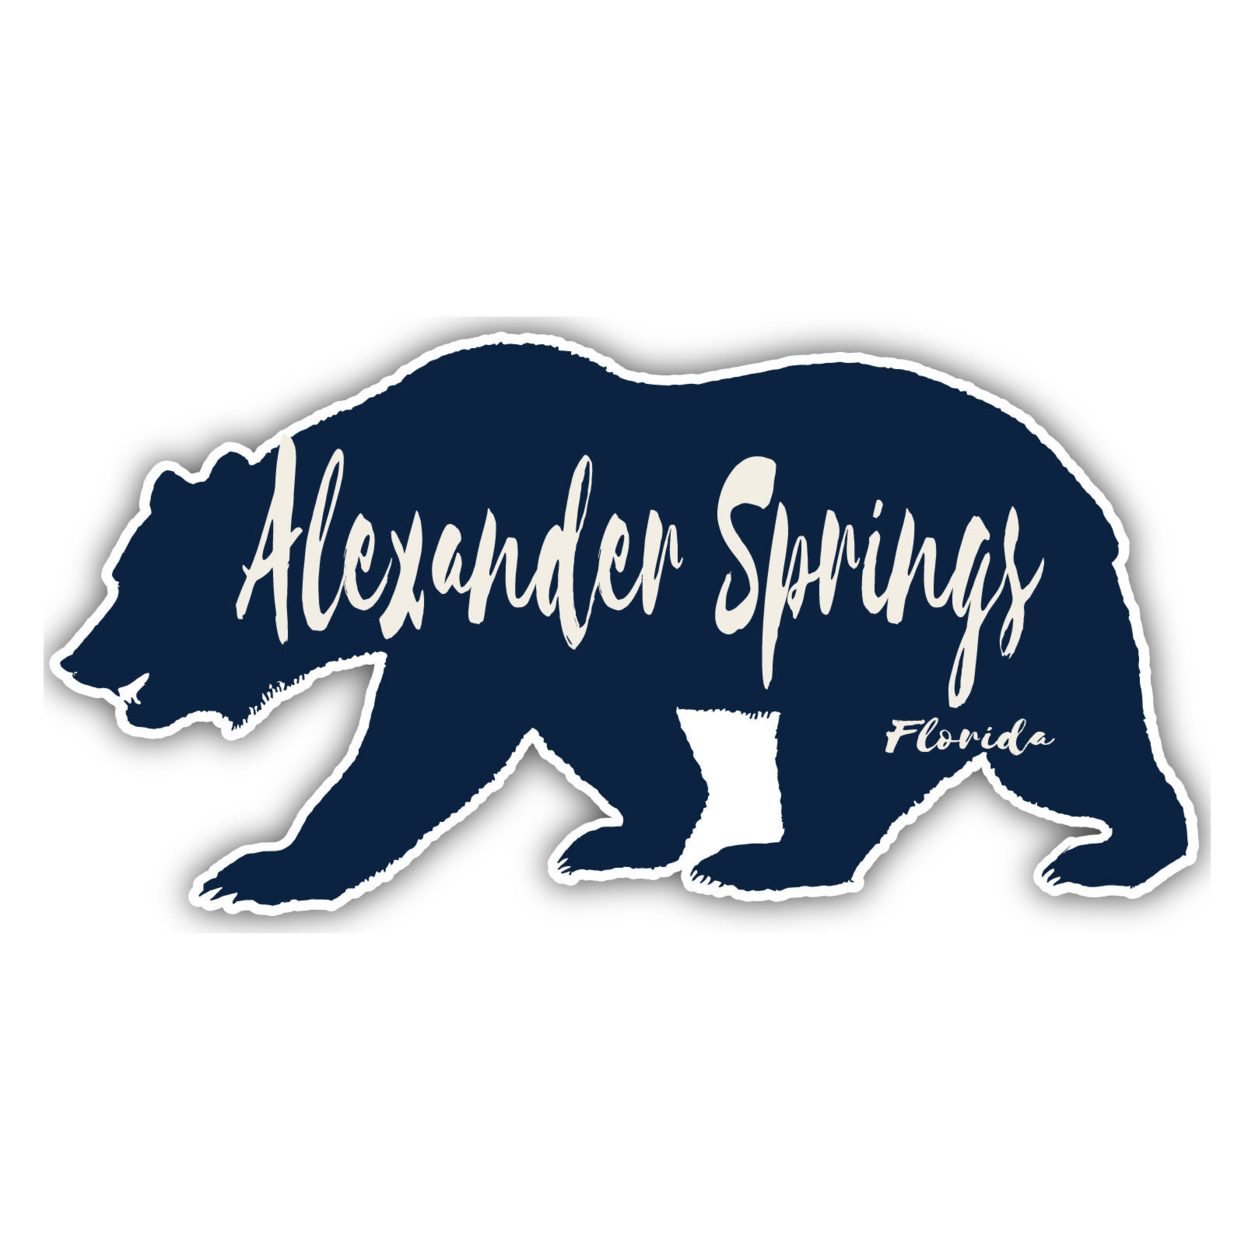 Alexander Springs Florida Souvenir Decorative Stickers (Choose Theme And Size) - 4-Pack, 2-Inch, Bear